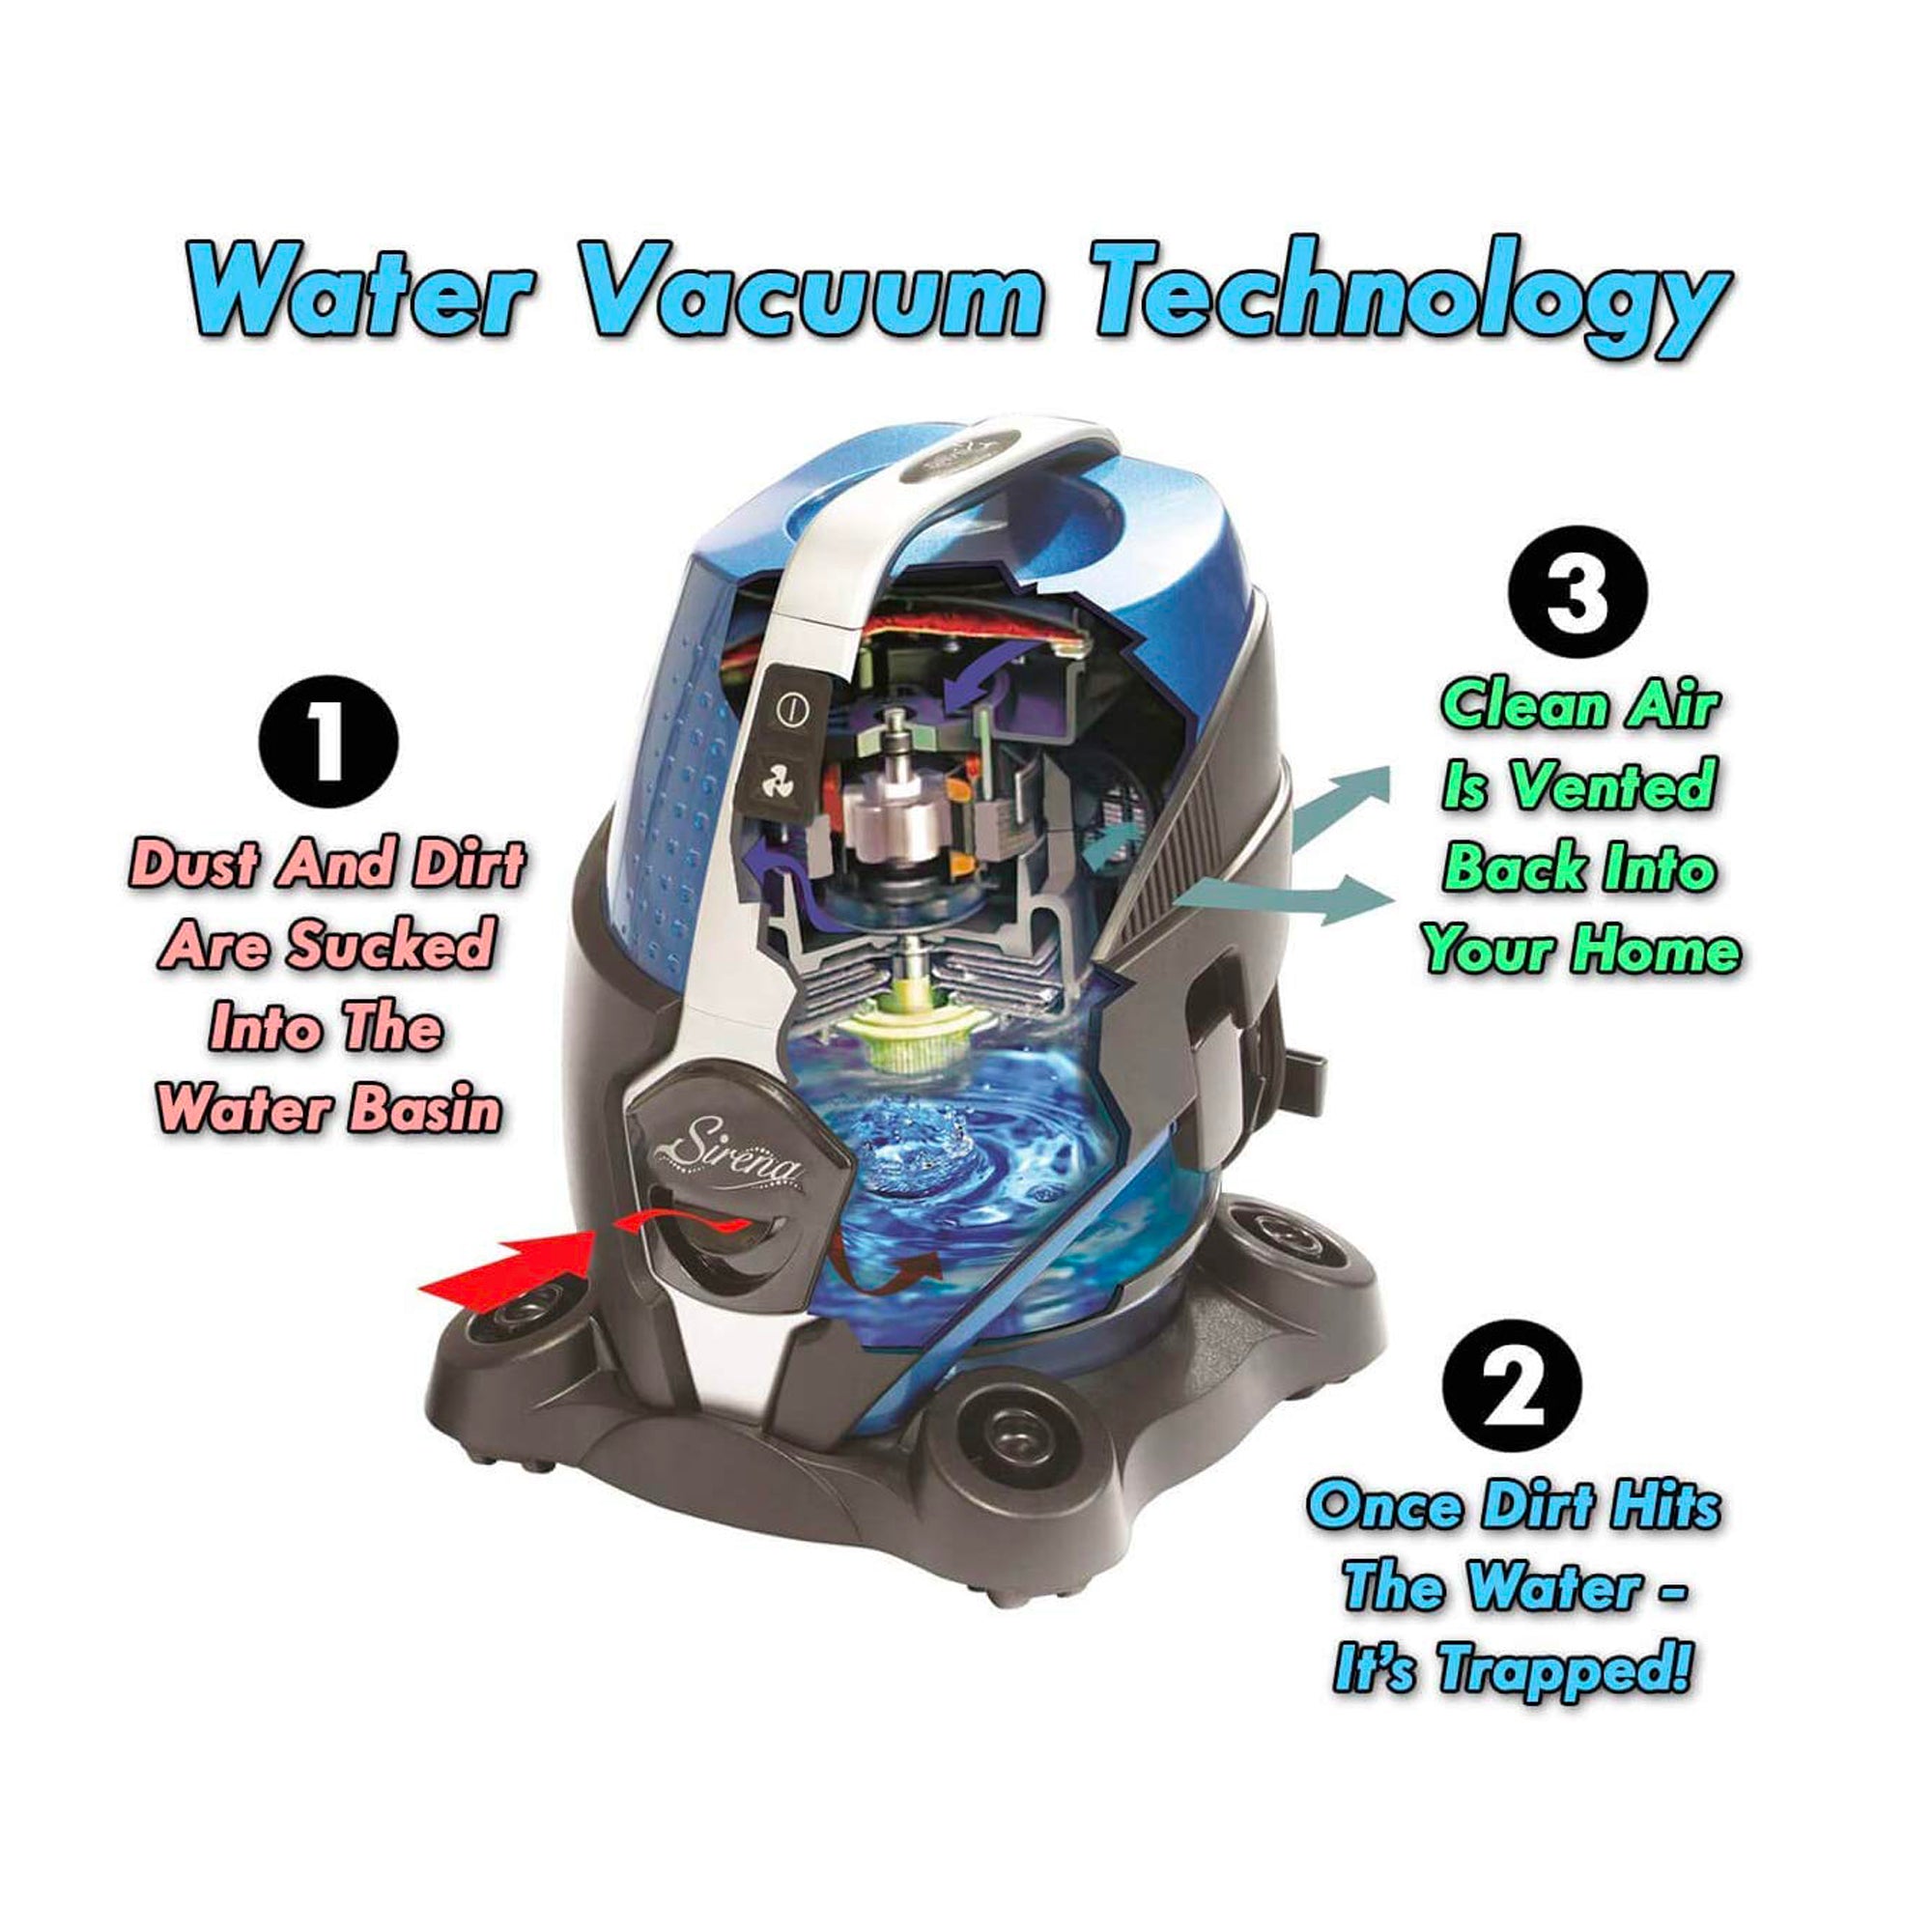 Sirena Canister Vacuum Cleaner - Water Vacuum Technology